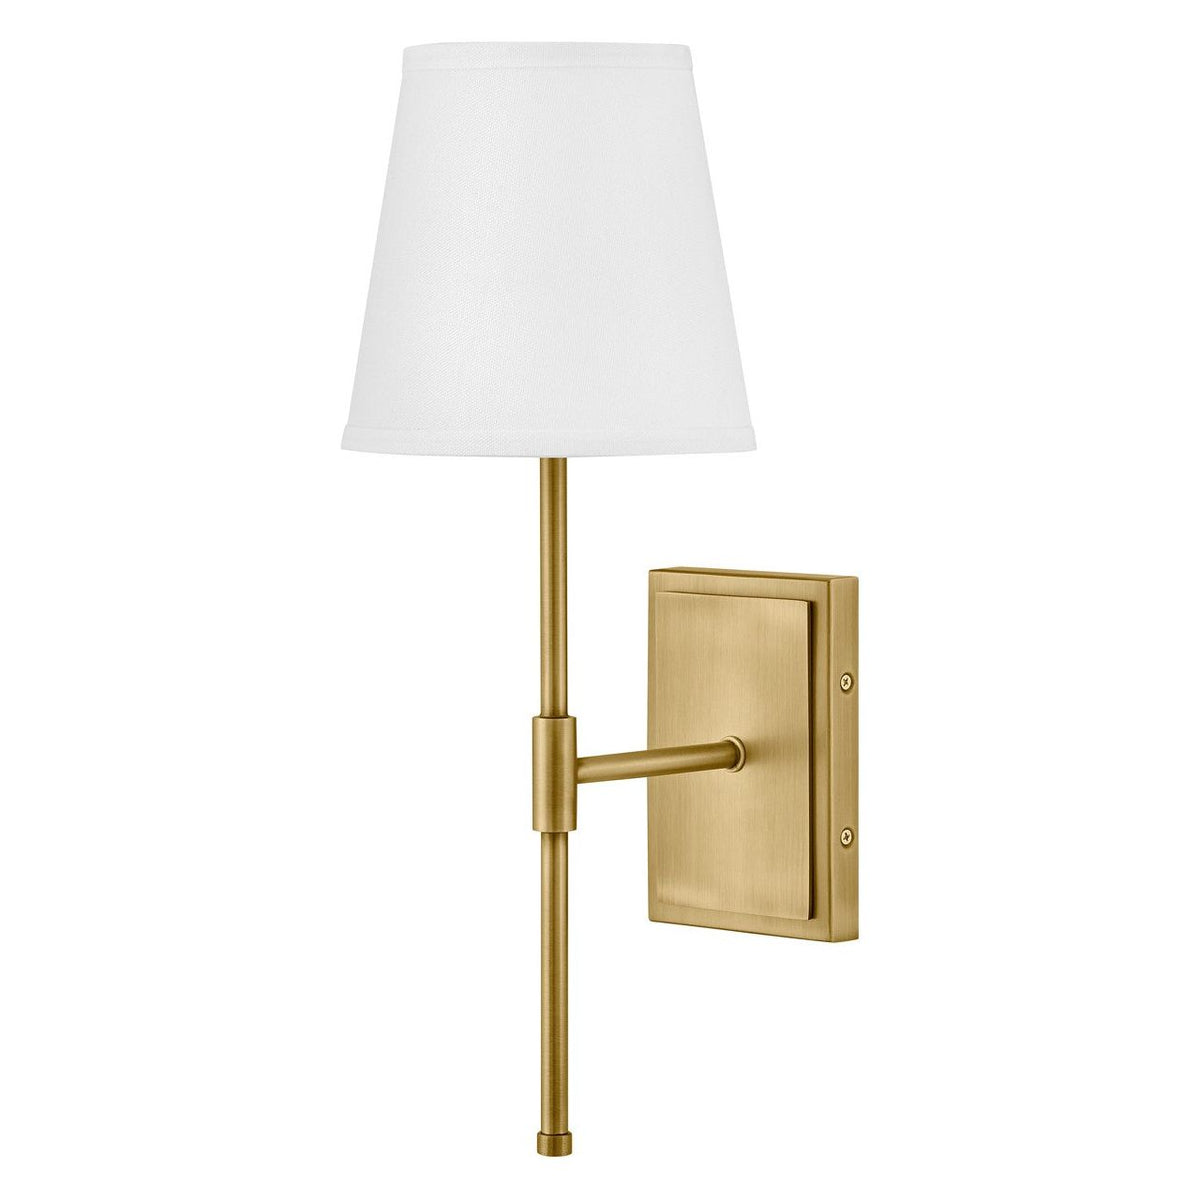 Lark Canada - 83770LCB - LED Wall Sconce - Beale - Lacquered Brass